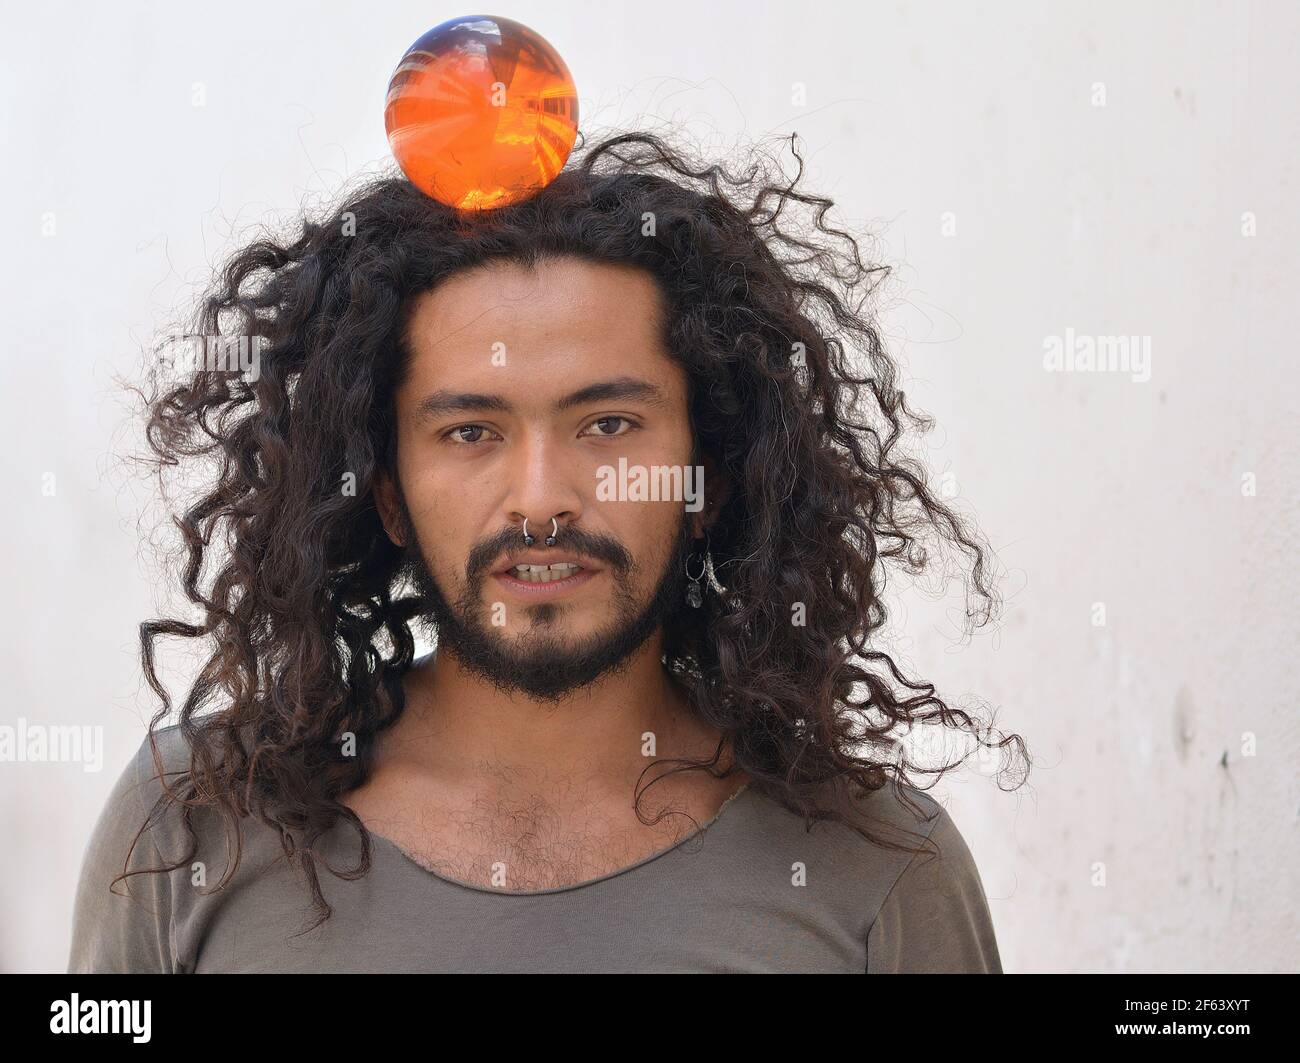 Handsome bearded young Mexican man with long natural curls and septum nose ring balances an orange plastic ball on the top of his head. Stock Photo